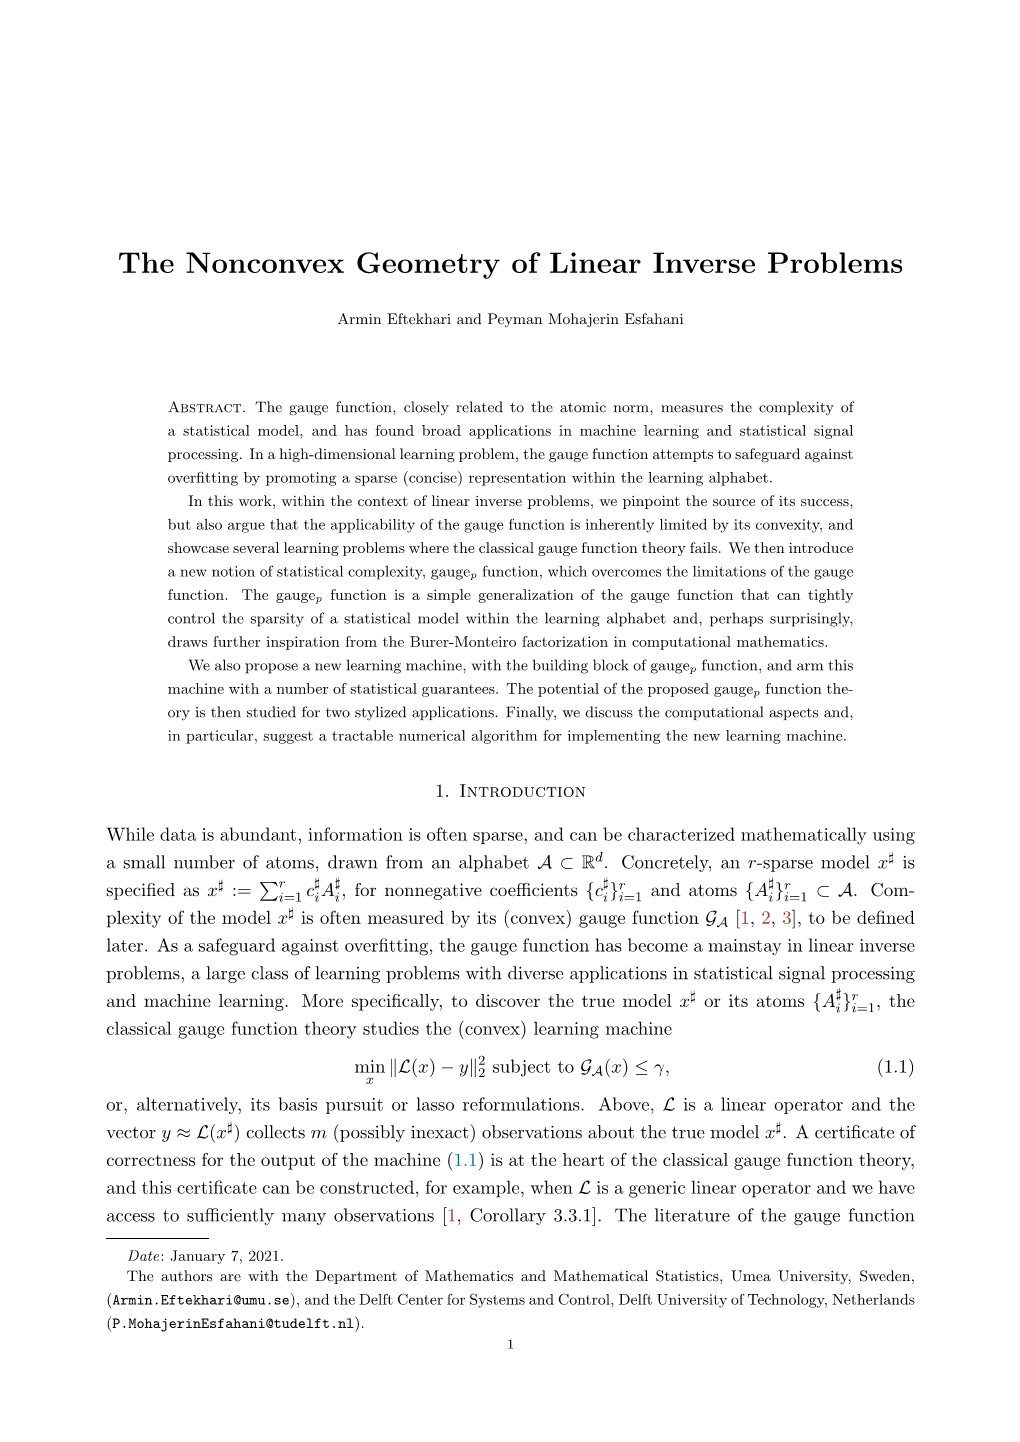 The Nonconvex Geometry of Linear Inverse Problems